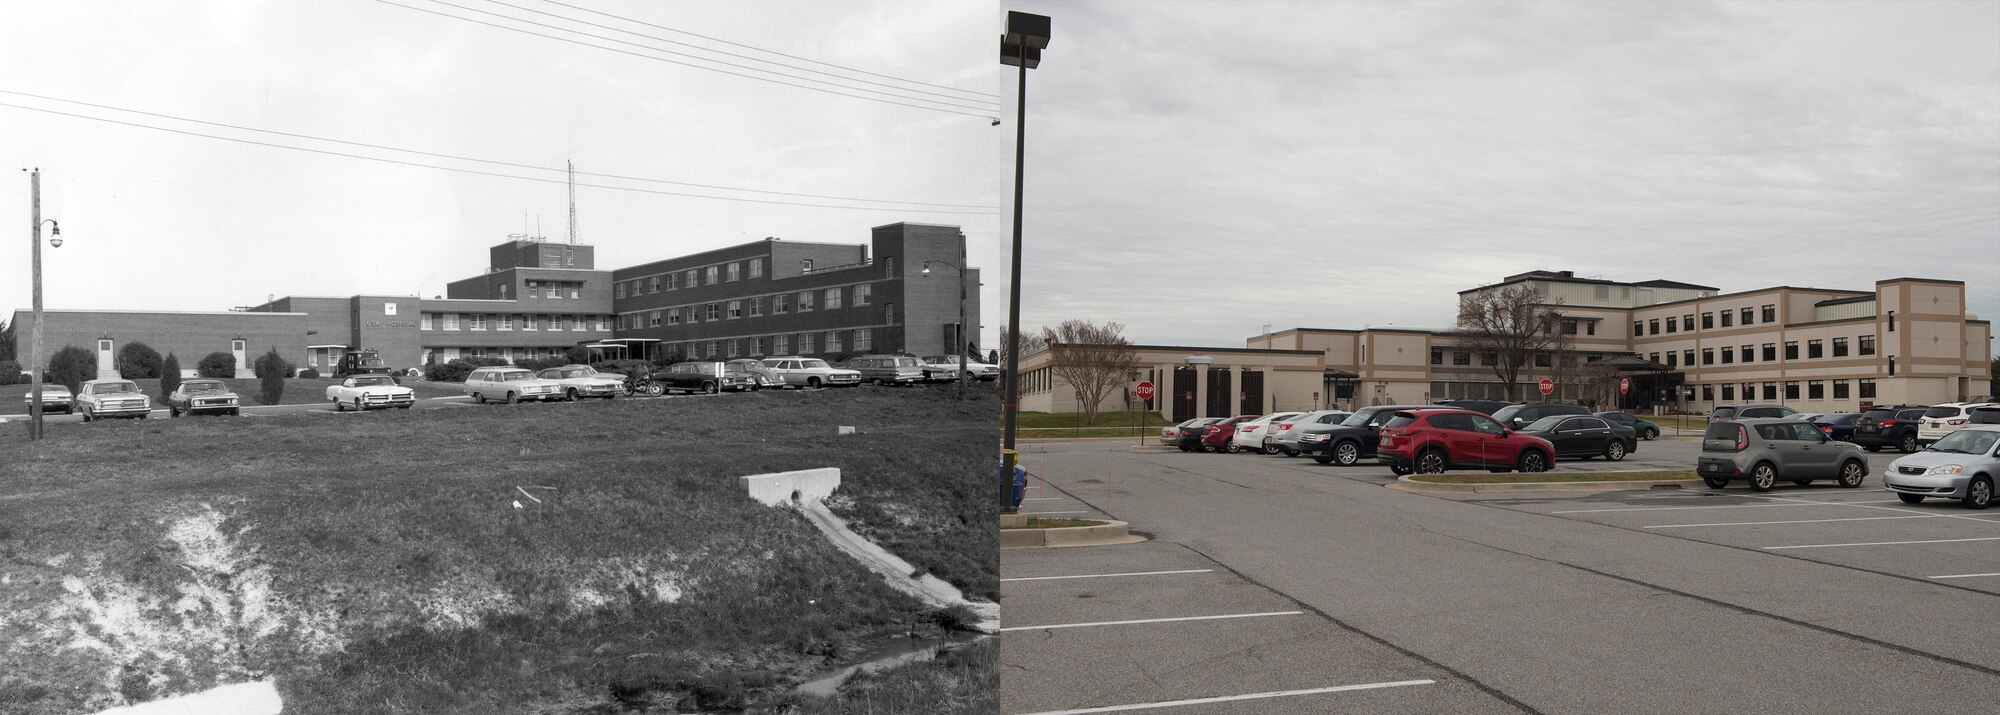 Circa 1970s versus 2016: The 436th Medical Group clinic. (U.S. Air Force photo illustration by Senior Airman Zachary Cacicia)